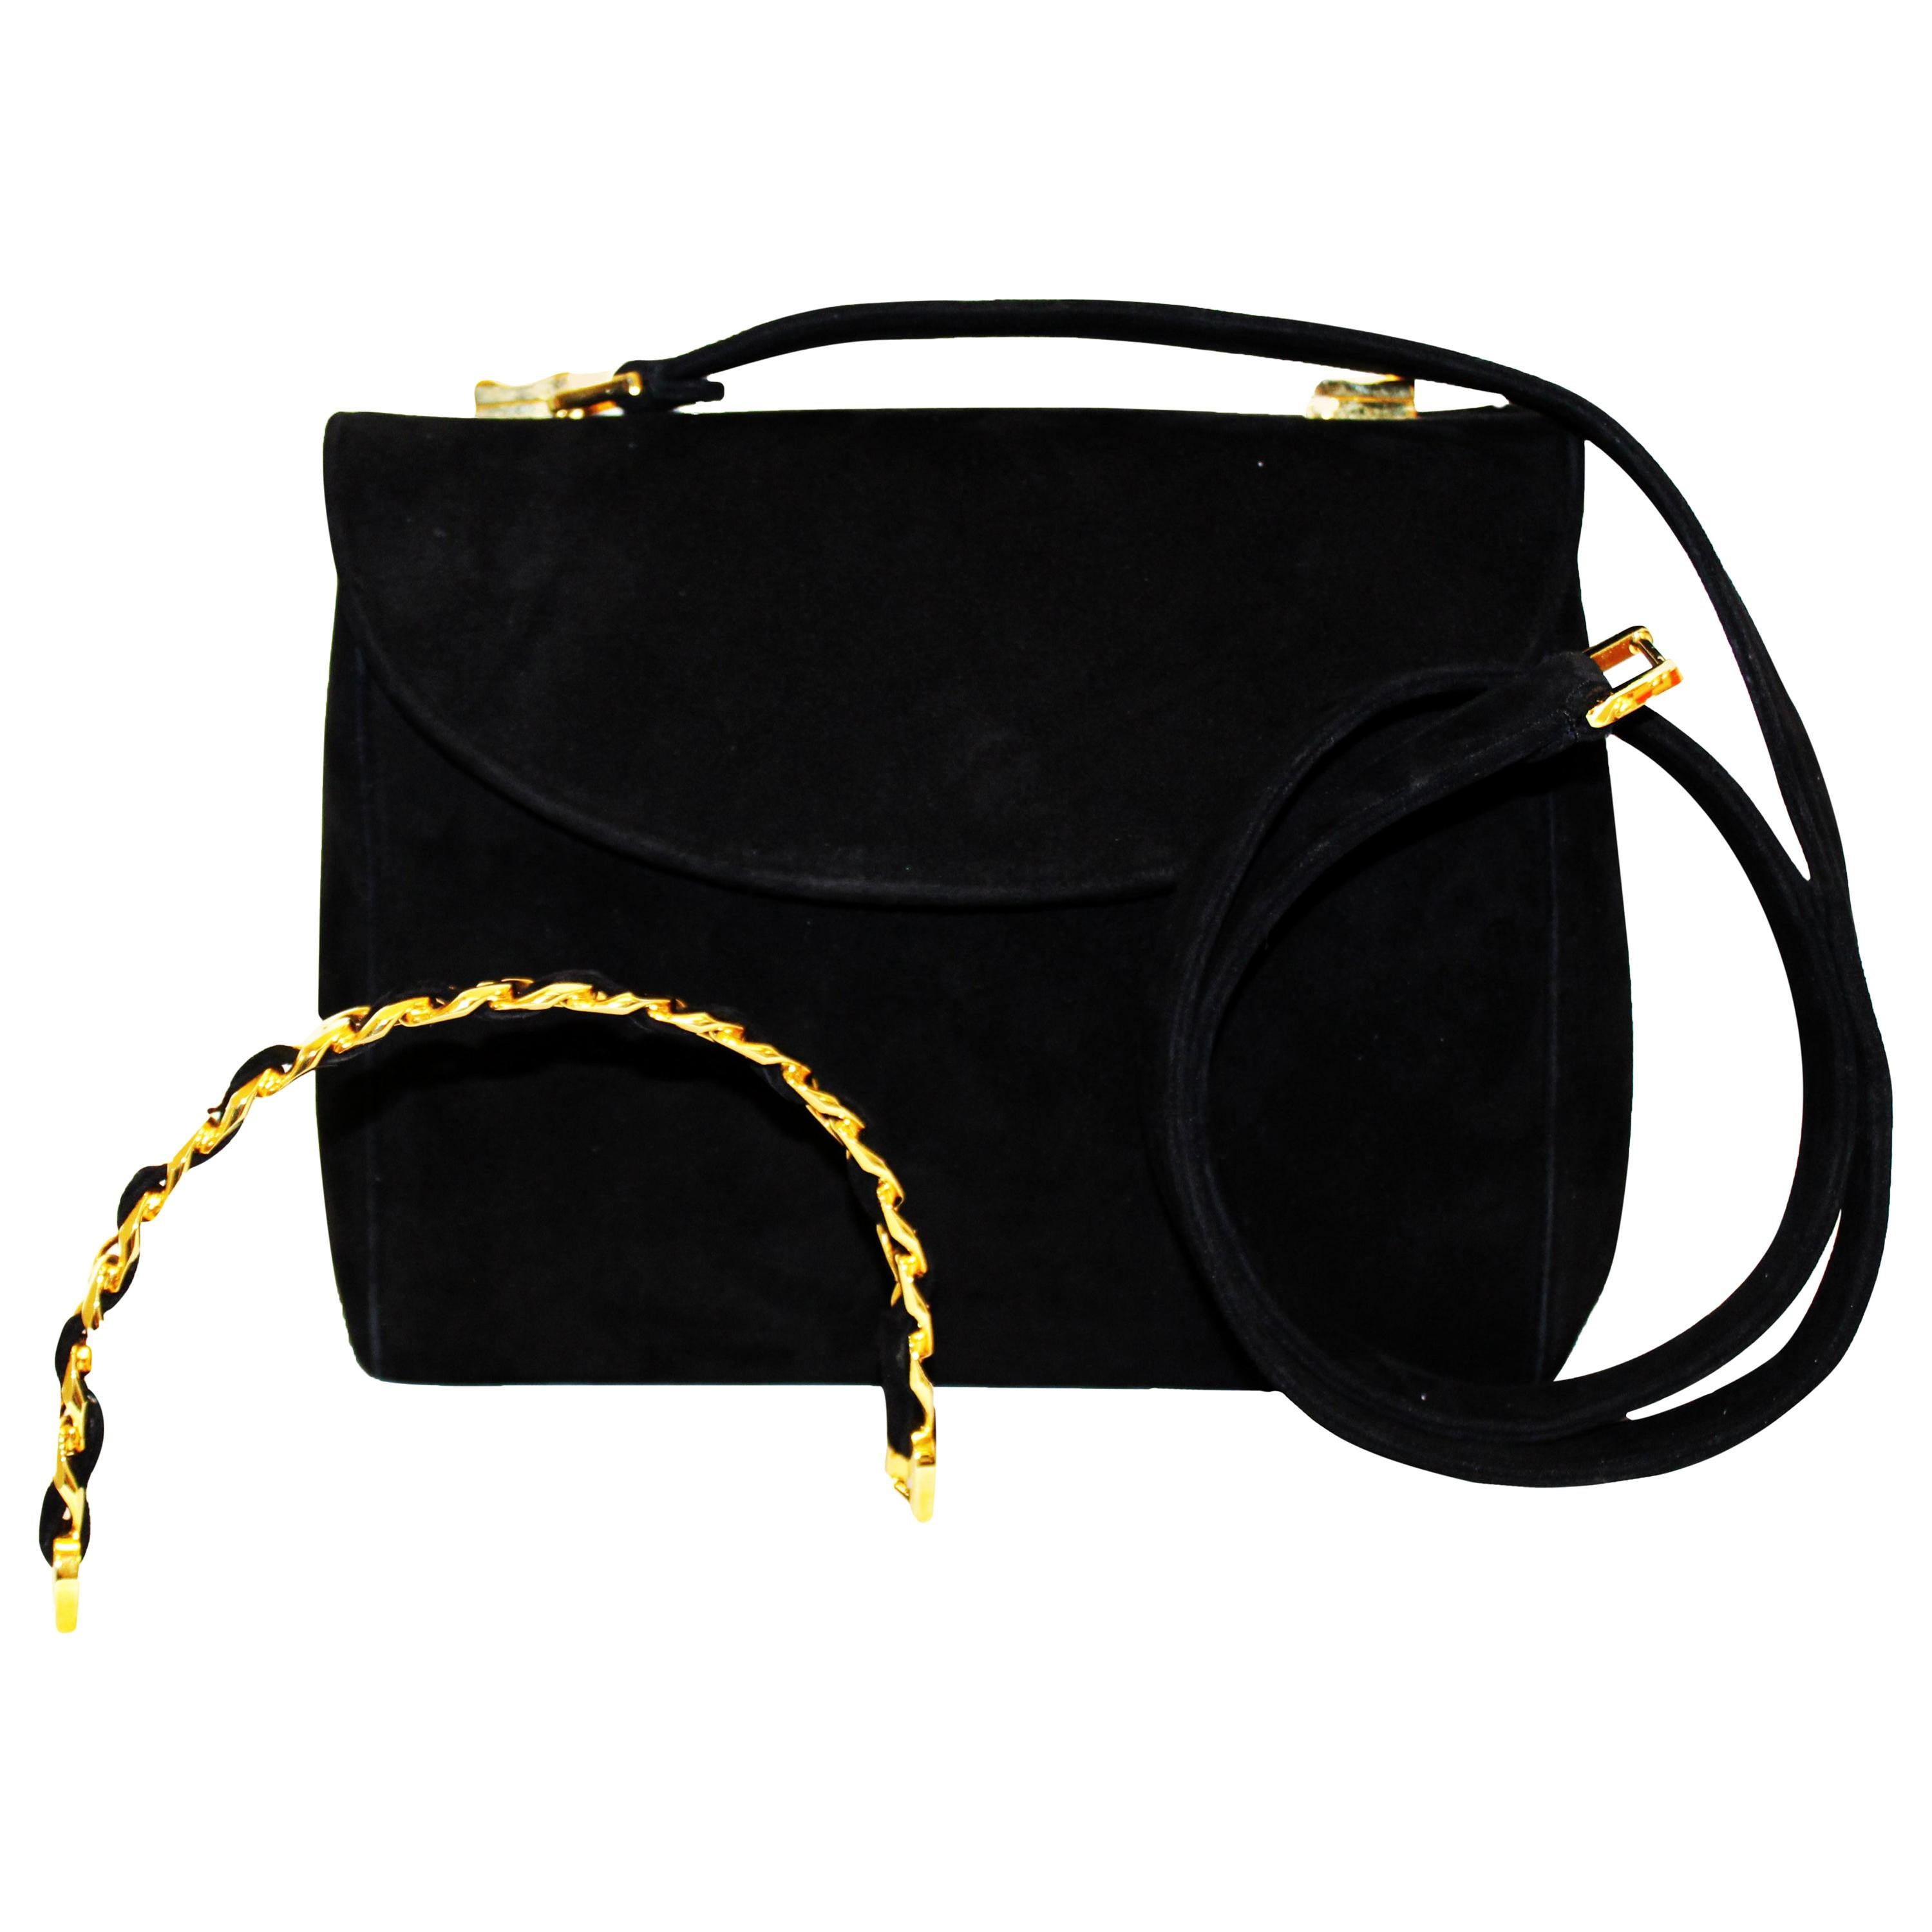 Judith Leiber Black Suede Karung W/ Structured Top Handle Bag For Sale